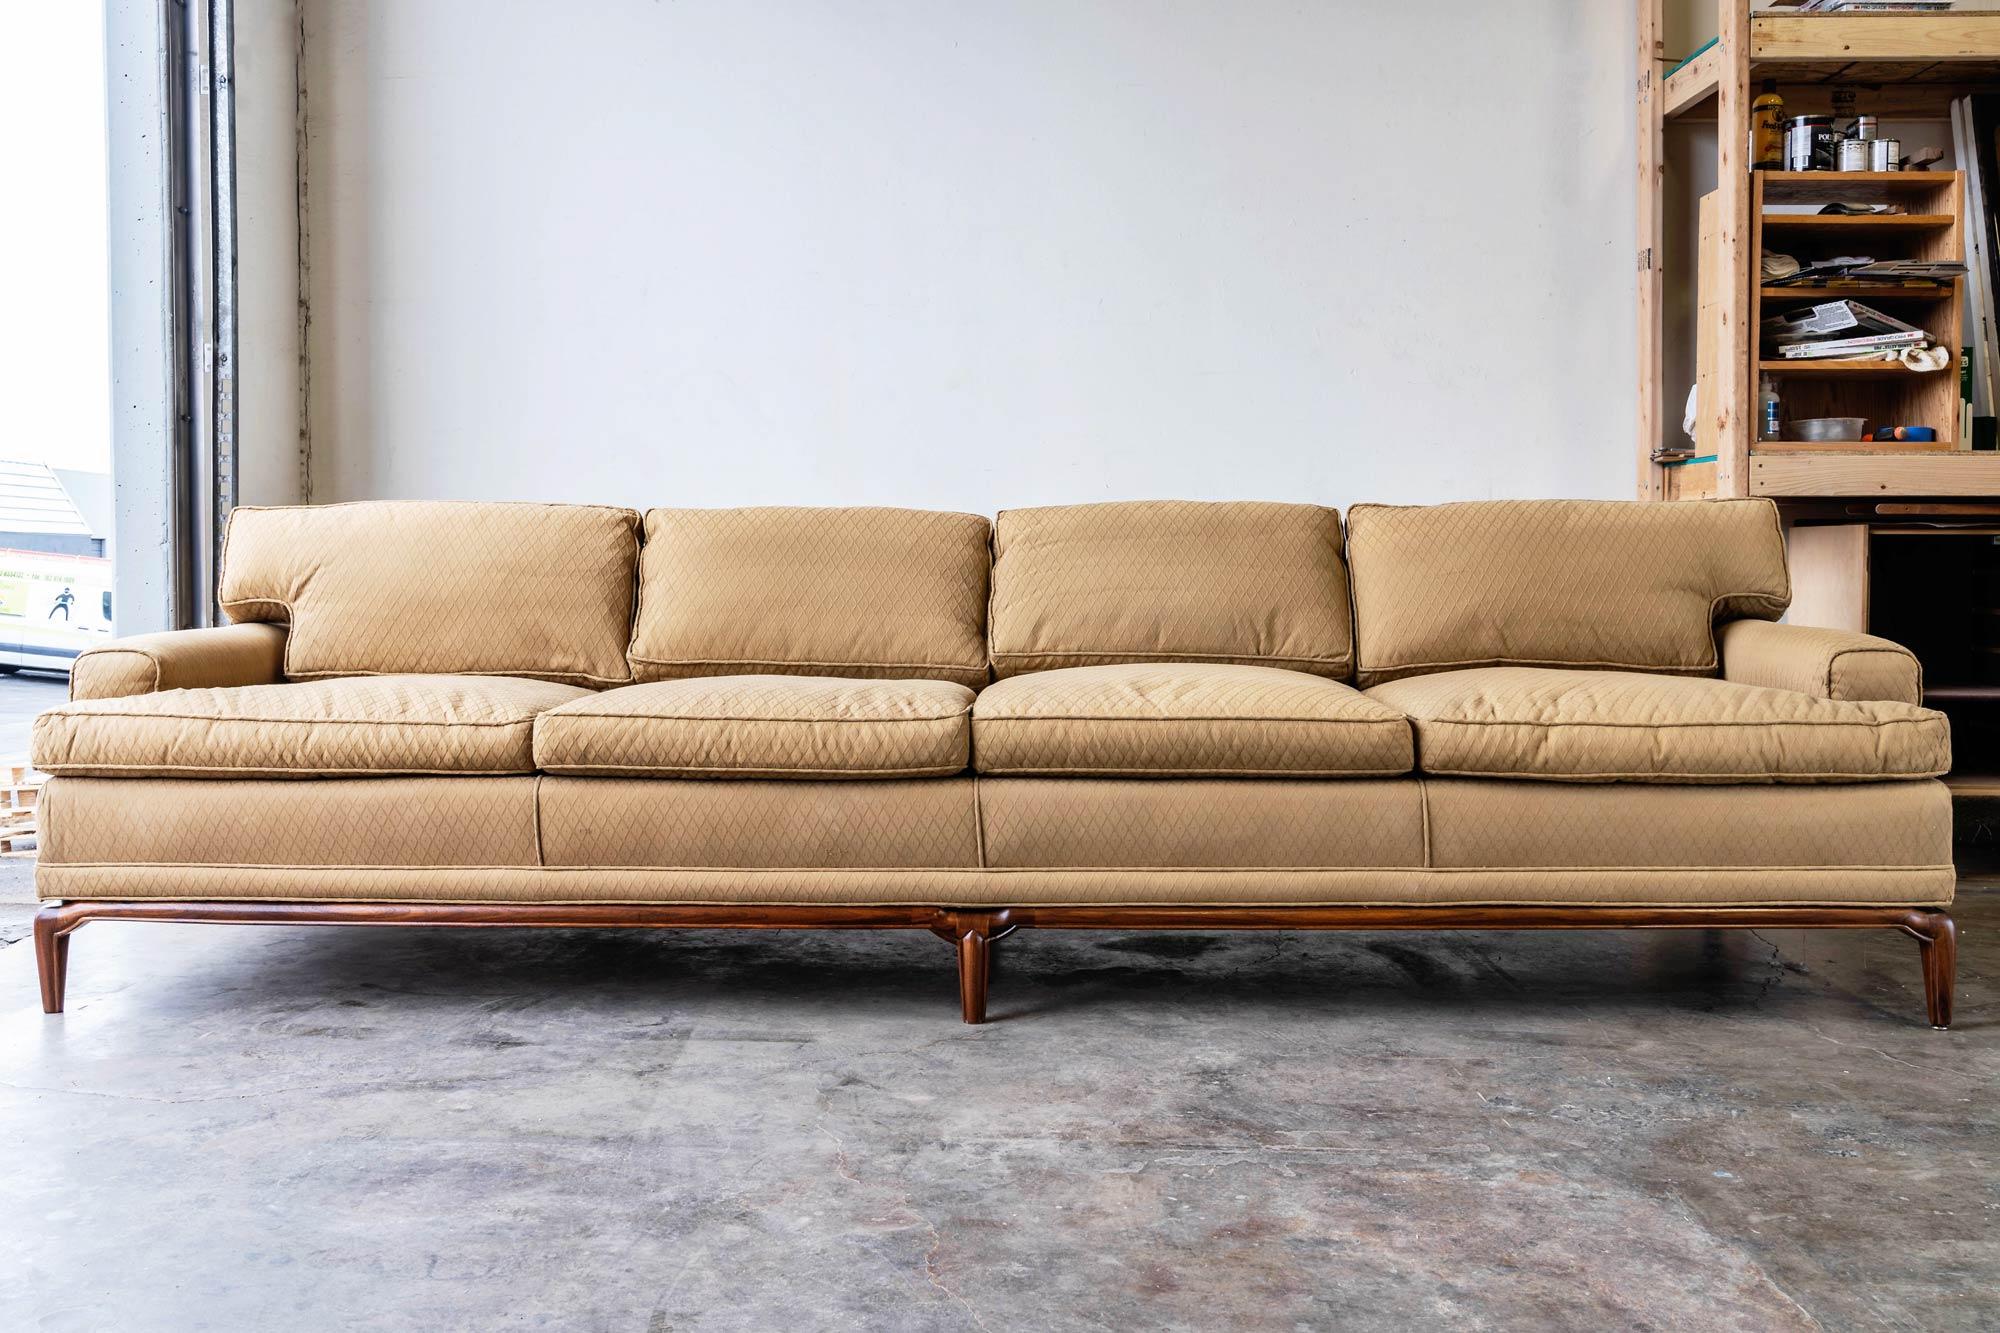 
Mid-Century Modern Maurice Bailey for Monteverdi-Young Sofa

If you want to create a space that's both stylish and comfortable, the Maurice Bailey for Monteverdi-Young of Beverly Hills sofa is the perfect choice. With its sleek lines, elegant